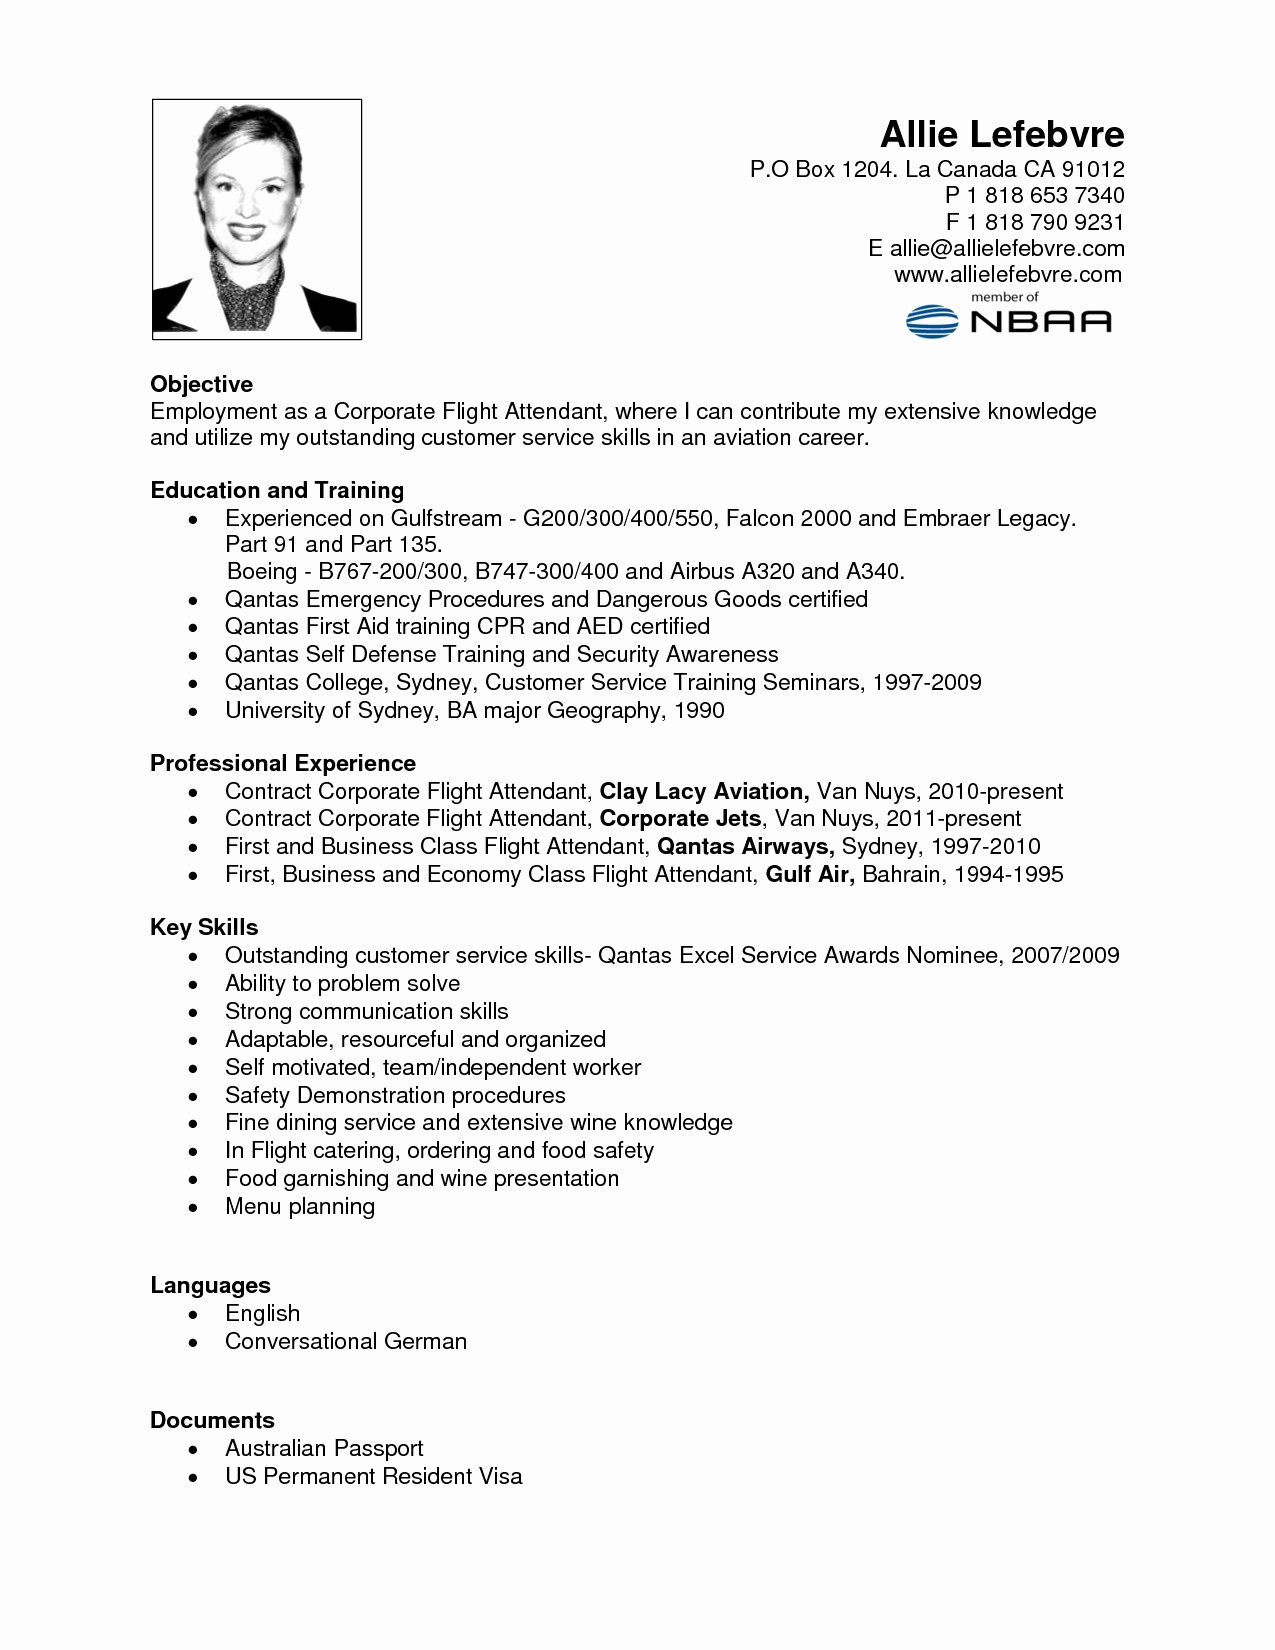 Sample Resume for Flight attendant without Experience Flight attendant Resume Sample